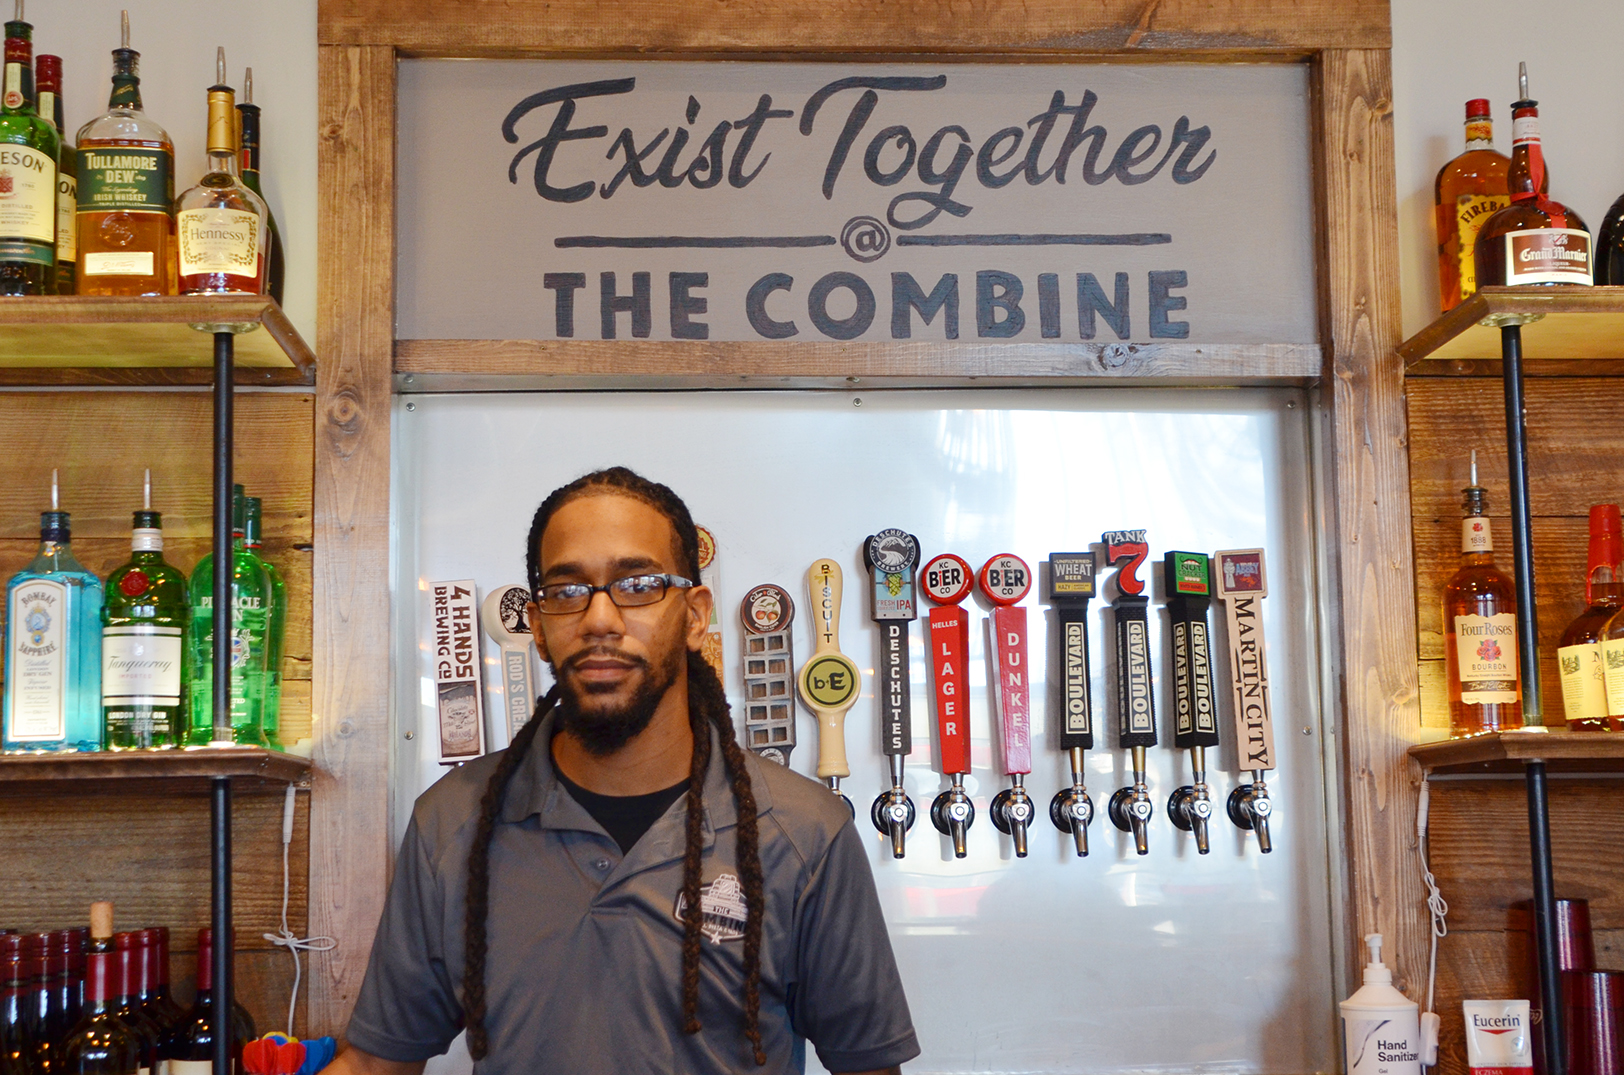 The Combine hopes to cultivate KC unity with pizza and cocktails on Troost